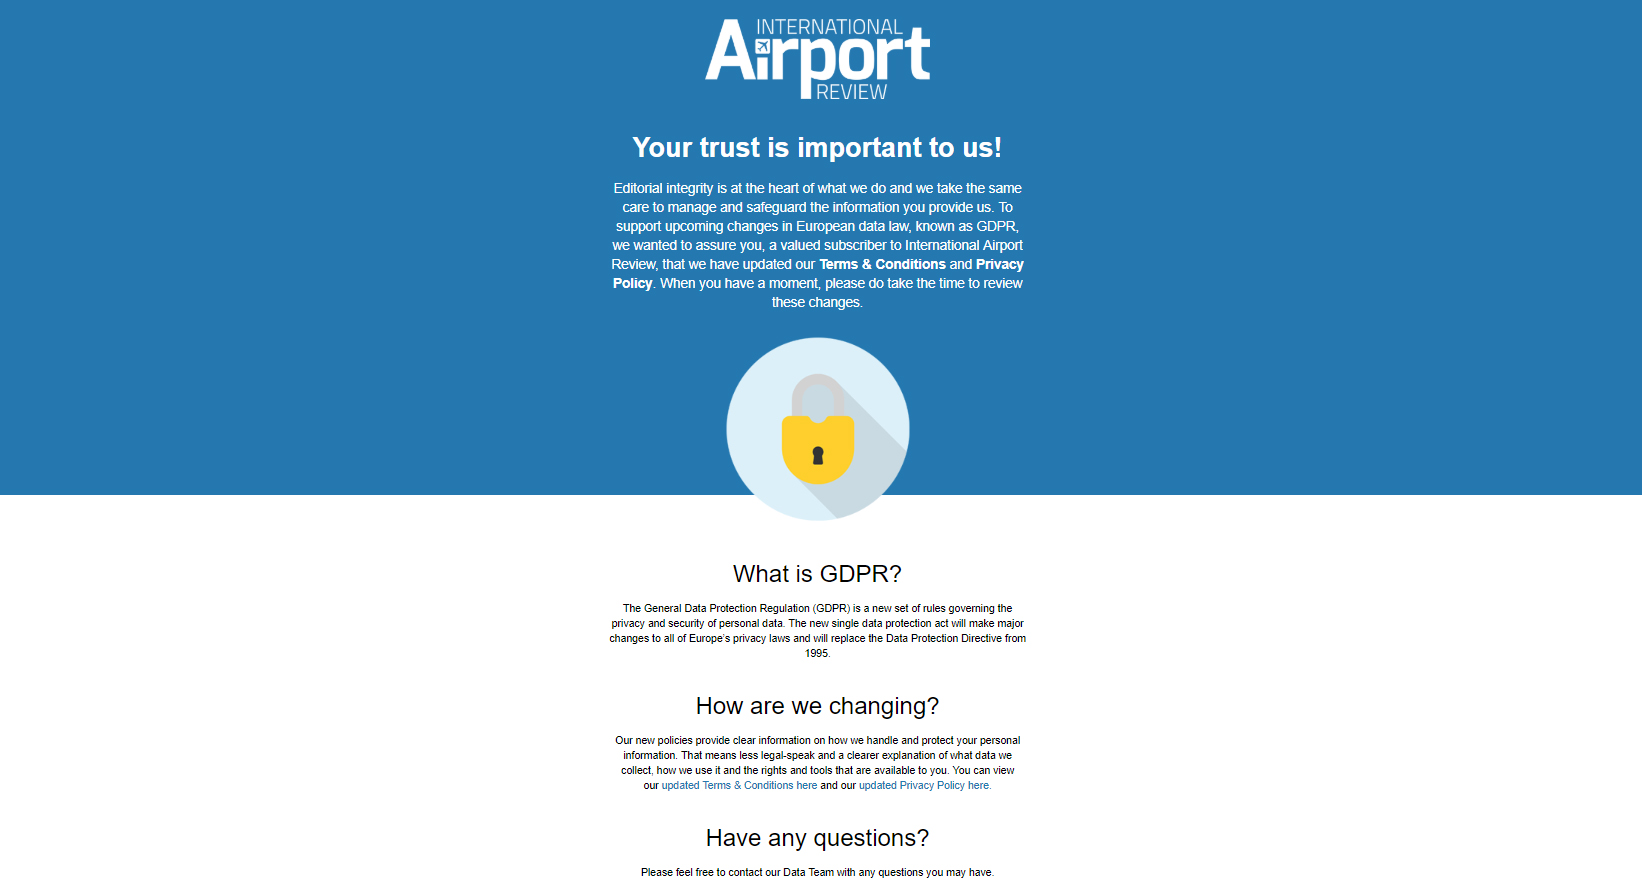 International Airport Review GDPR email